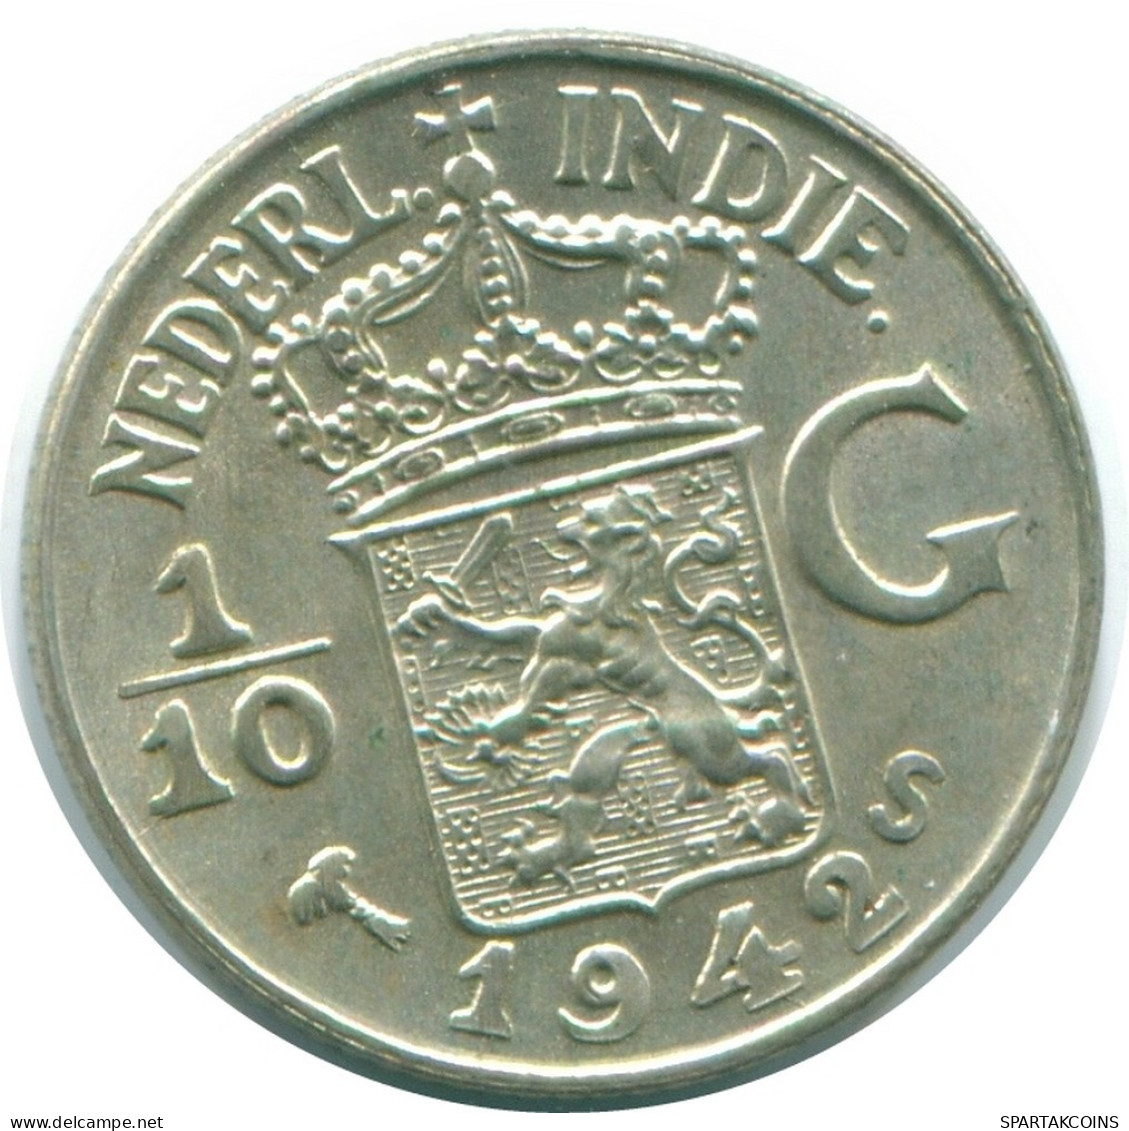 1/10 GULDEN 1942 NETHERLANDS EAST INDIES SILVER Colonial Coin #NL13882.3.U.A - Dutch East Indies